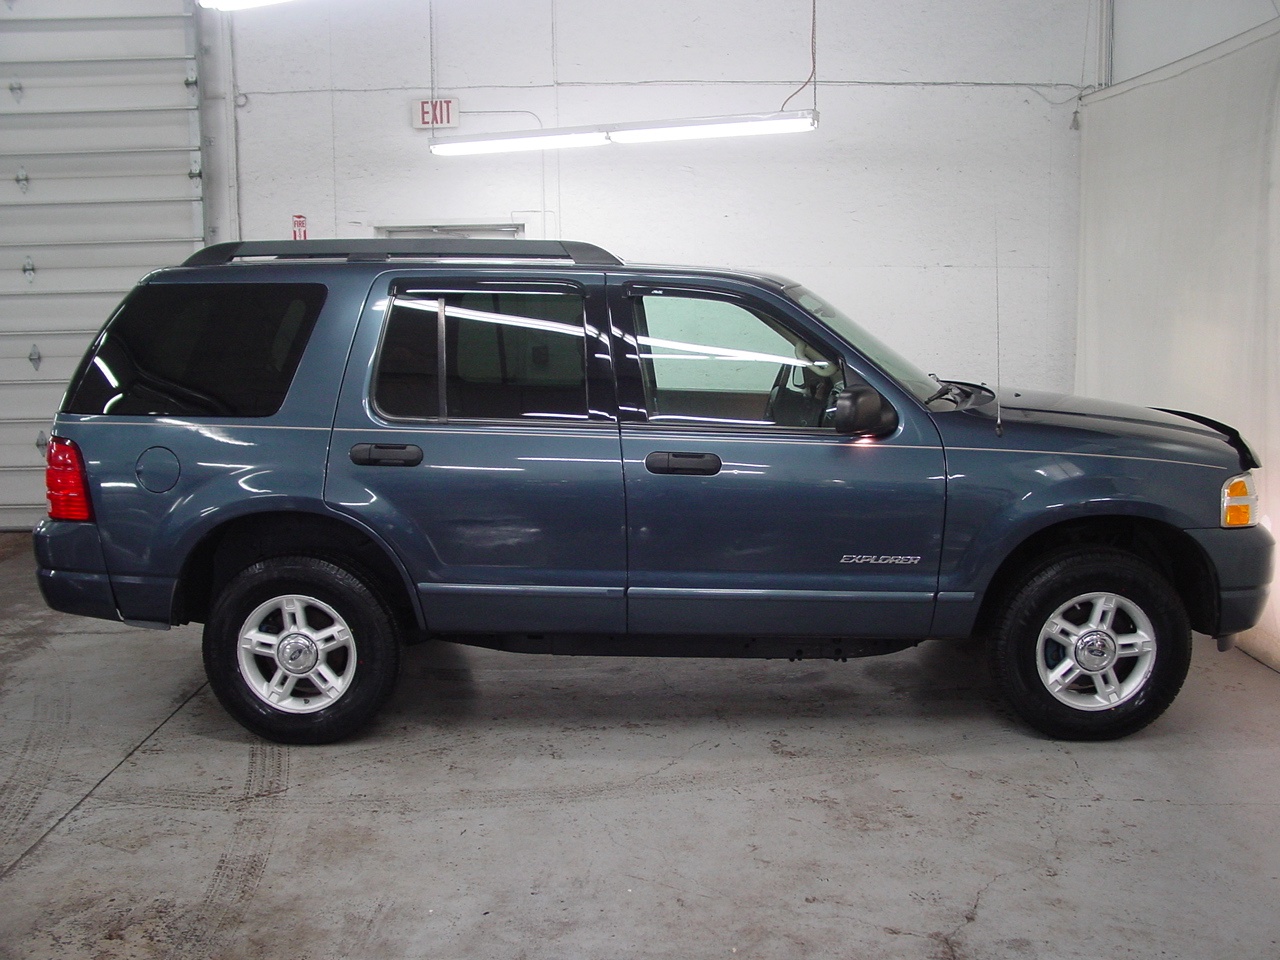 05 Ford Explorer Xlt Biscayne Auto Sales Pre Owned Dealership Ontario Ny